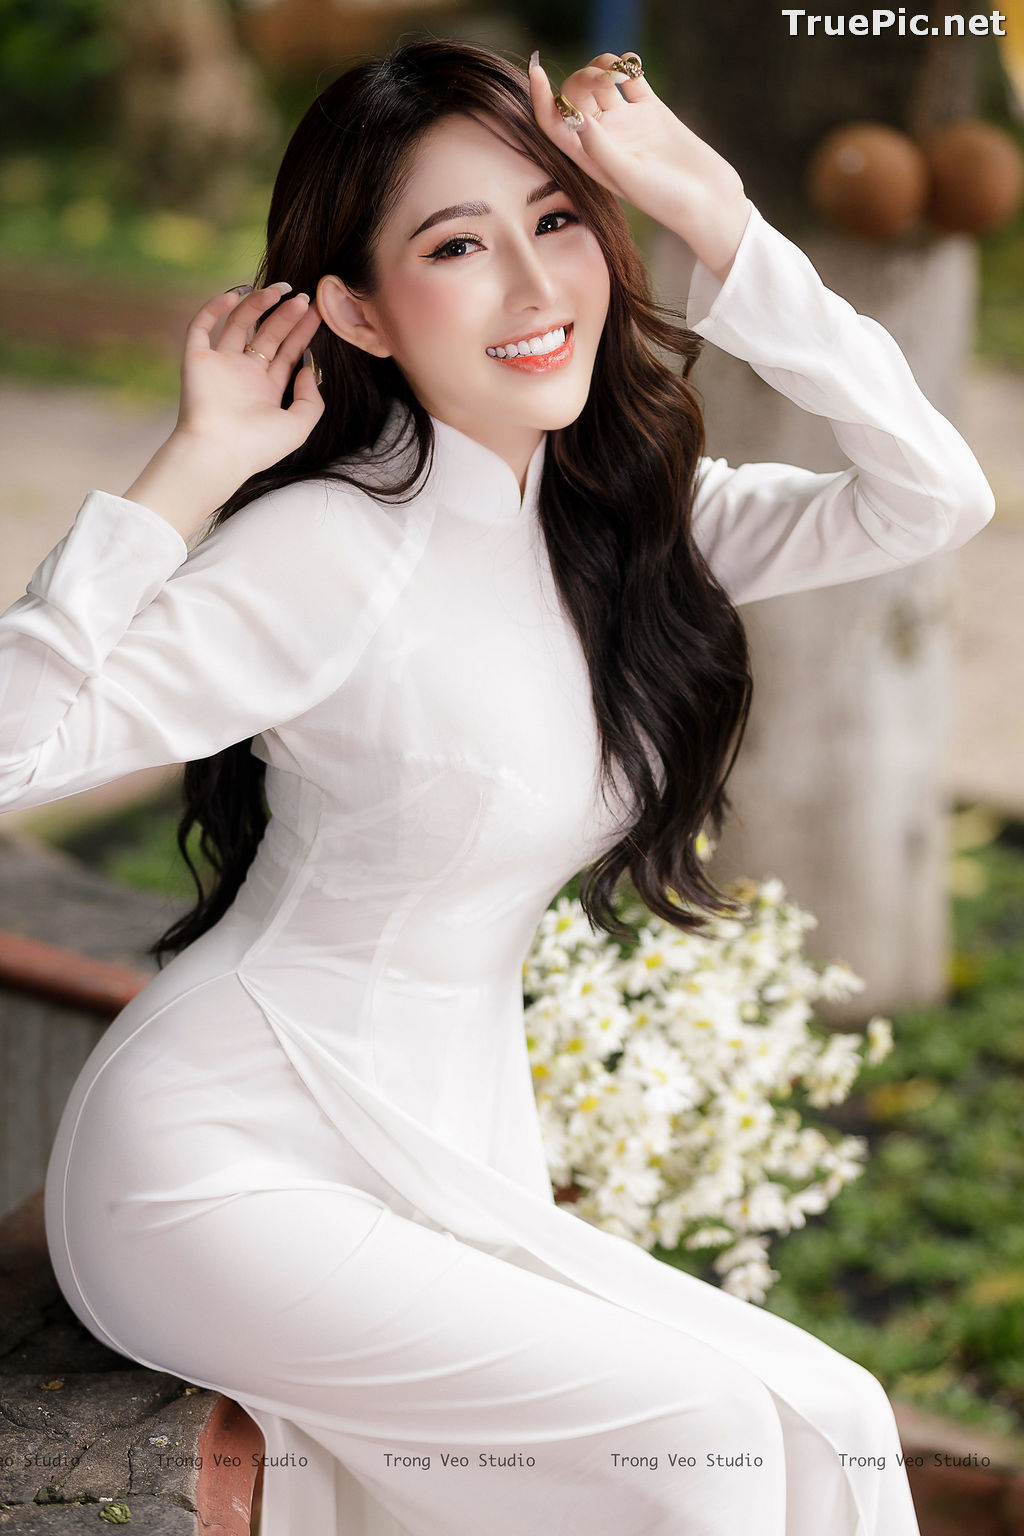 Image The Beauty of Vietnamese Girls with Traditional Dress (Ao Dai) #3 - TruePic.net - Picture-23